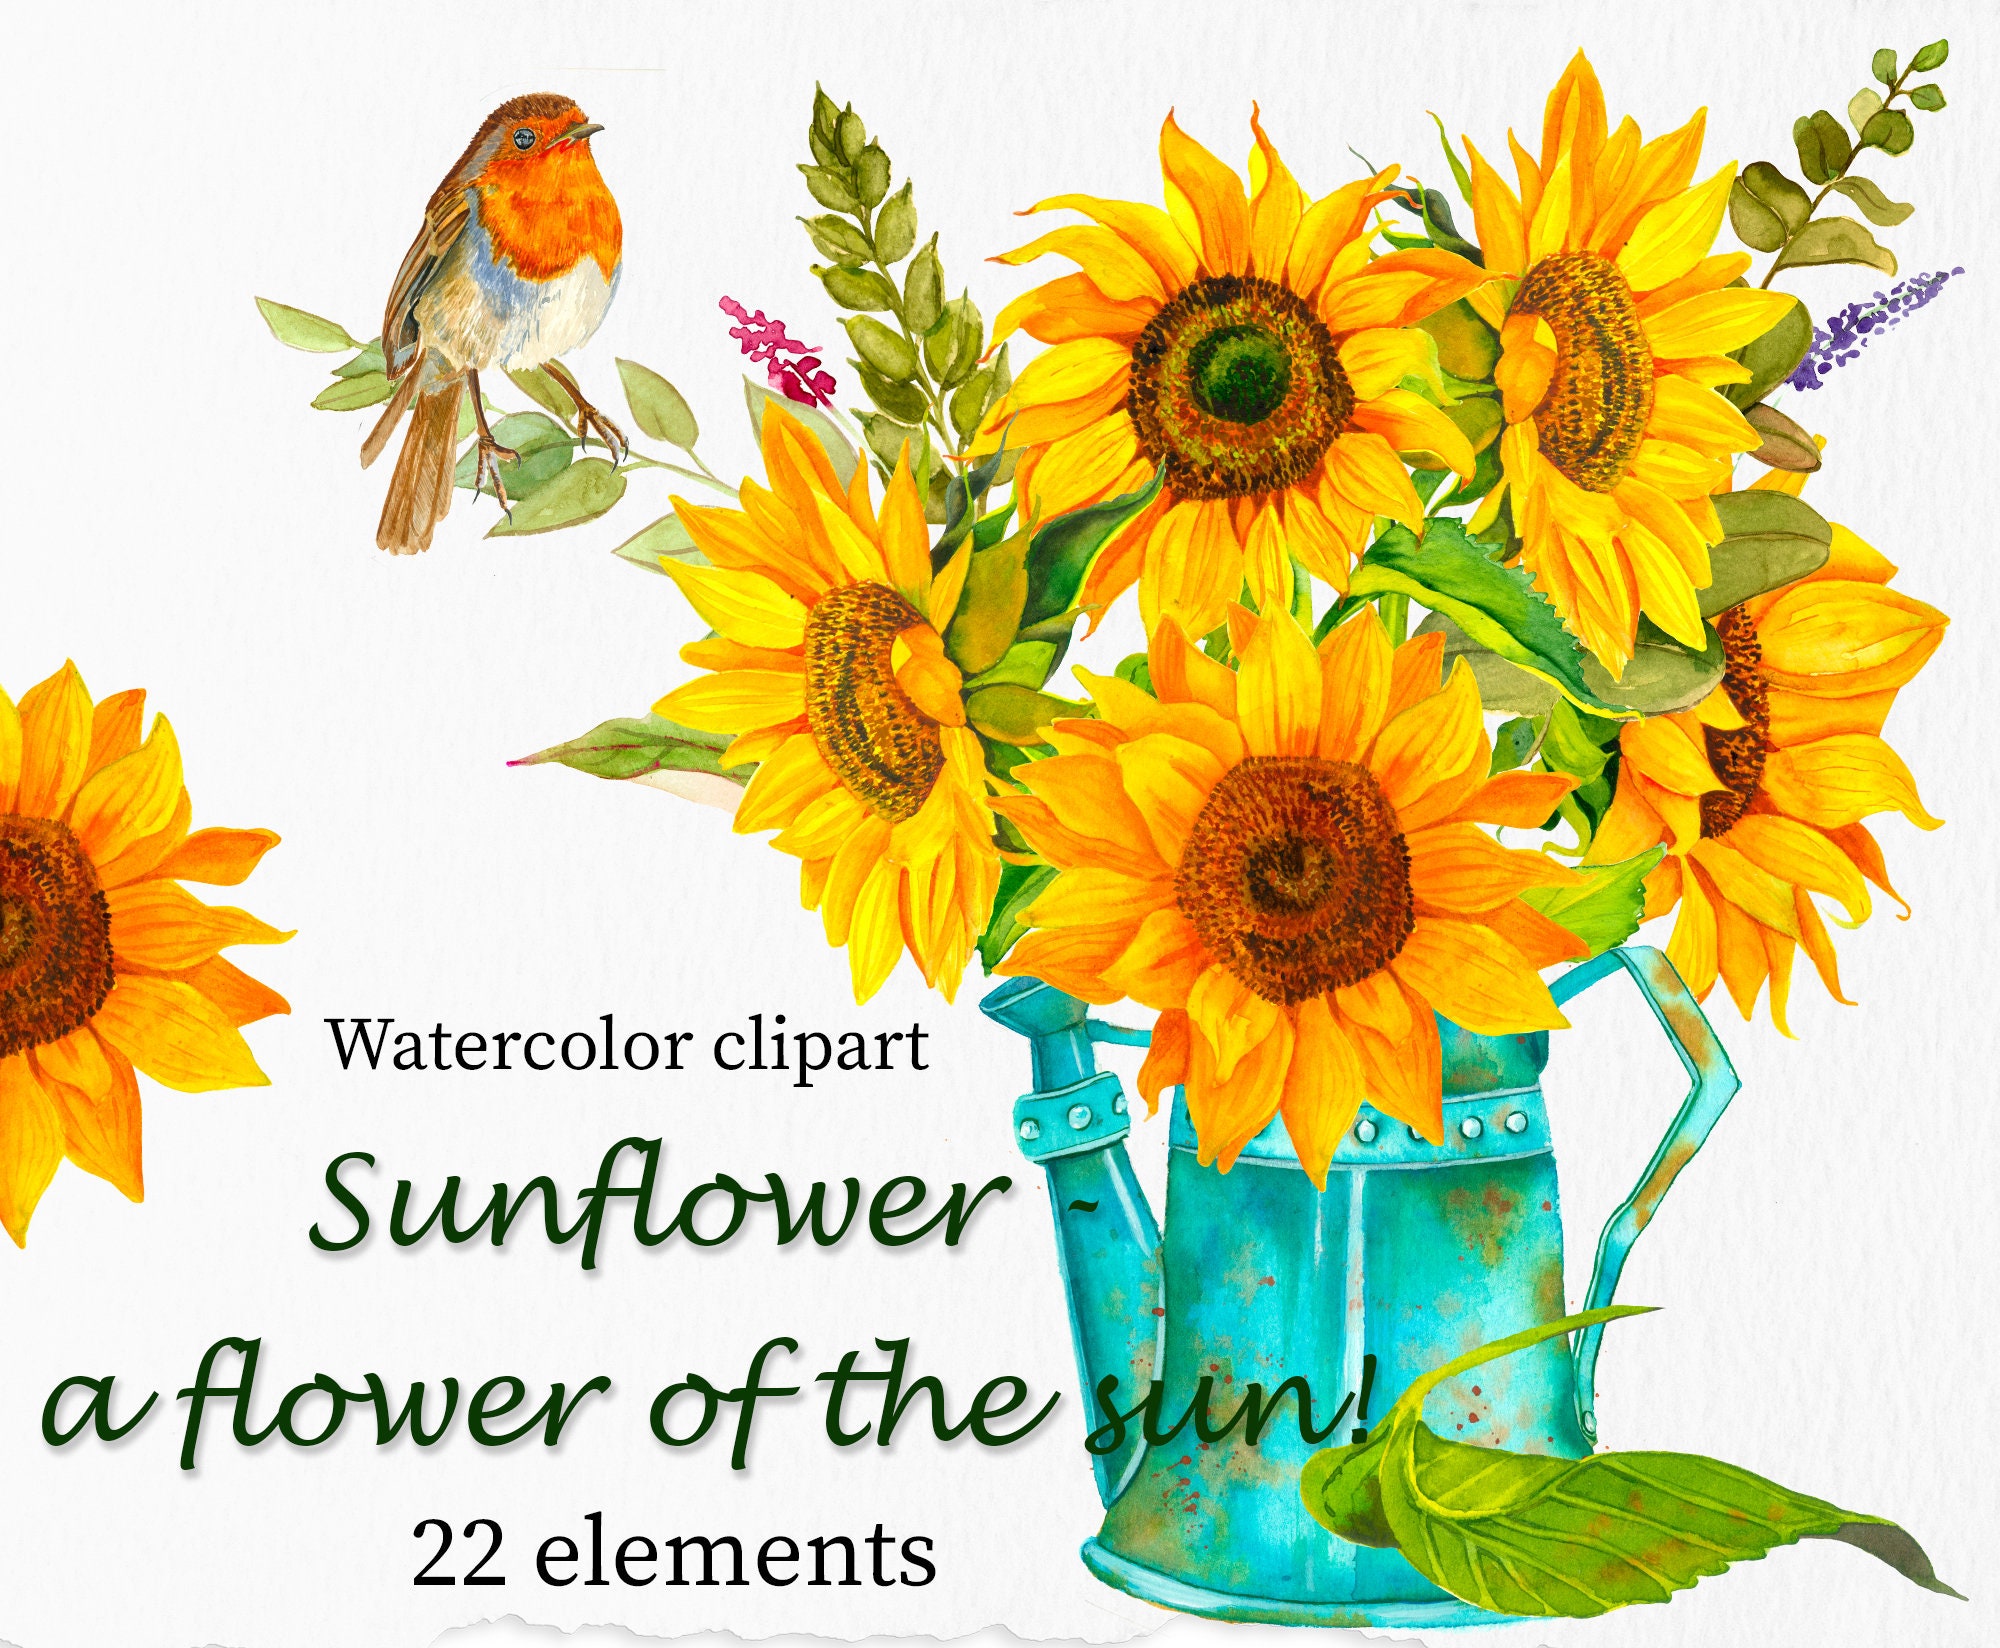 birds a bouquet of sunflowers Yellow Flowers Illustration DIY Wedding watering can The sun boho Sunflower watercolor clipart summer